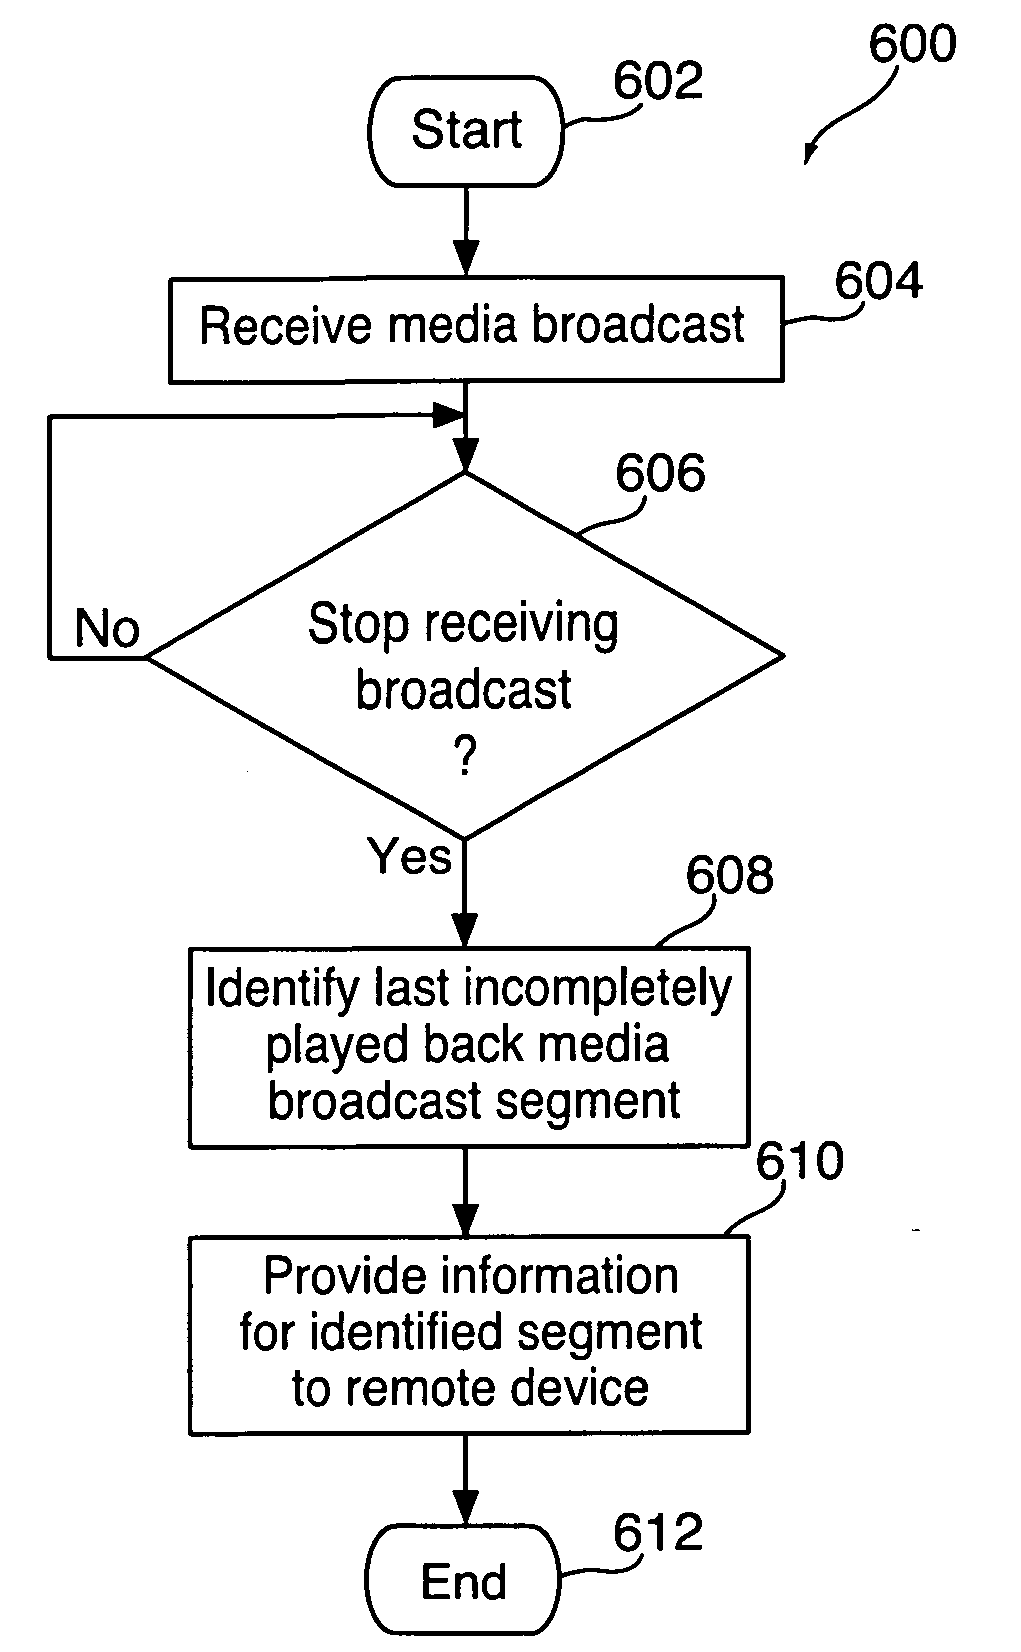 Accessing radio content from a non-radio source